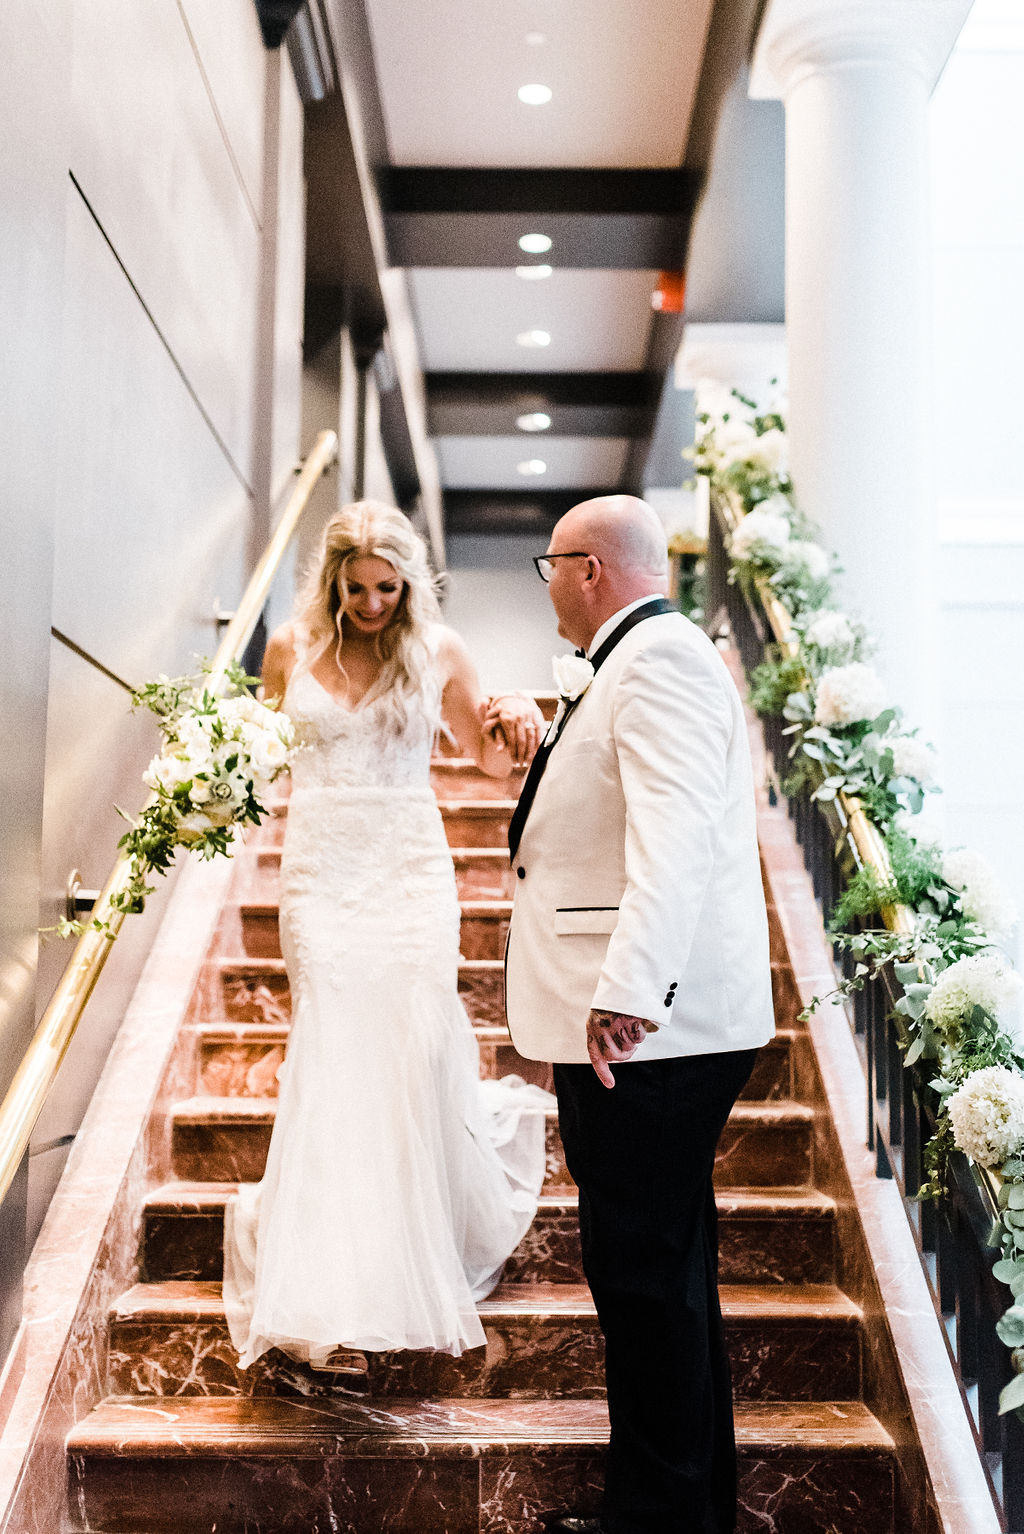 Tyler helps his new bride down the stairs at The Goodwin Hotel on their wedding day - Pearl Weddings &amp; Events